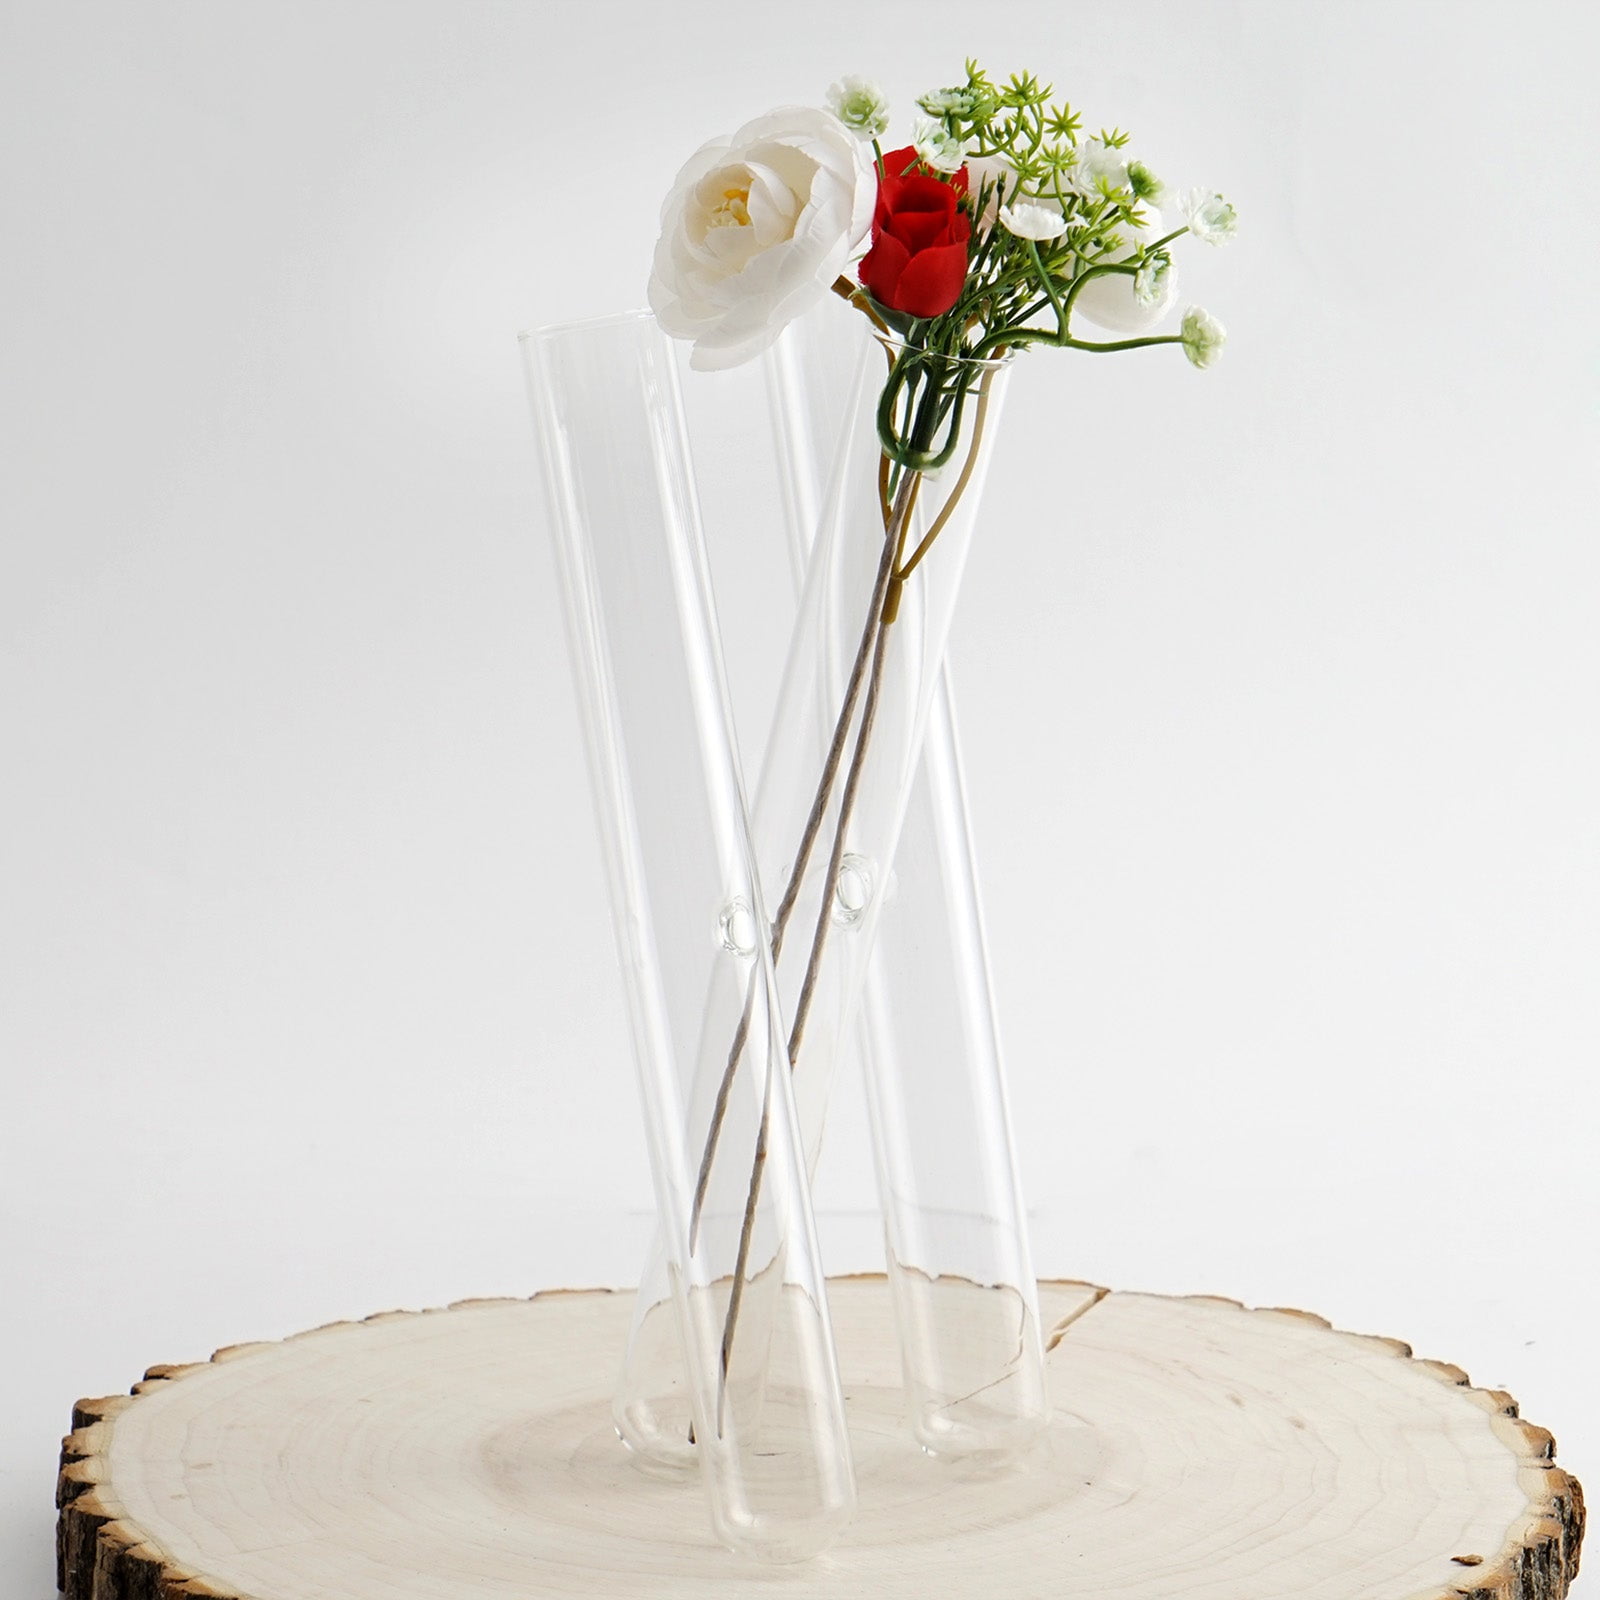 Space Ice Hanging Glass Vase for Single Stem Flowers Unusual and Fun 